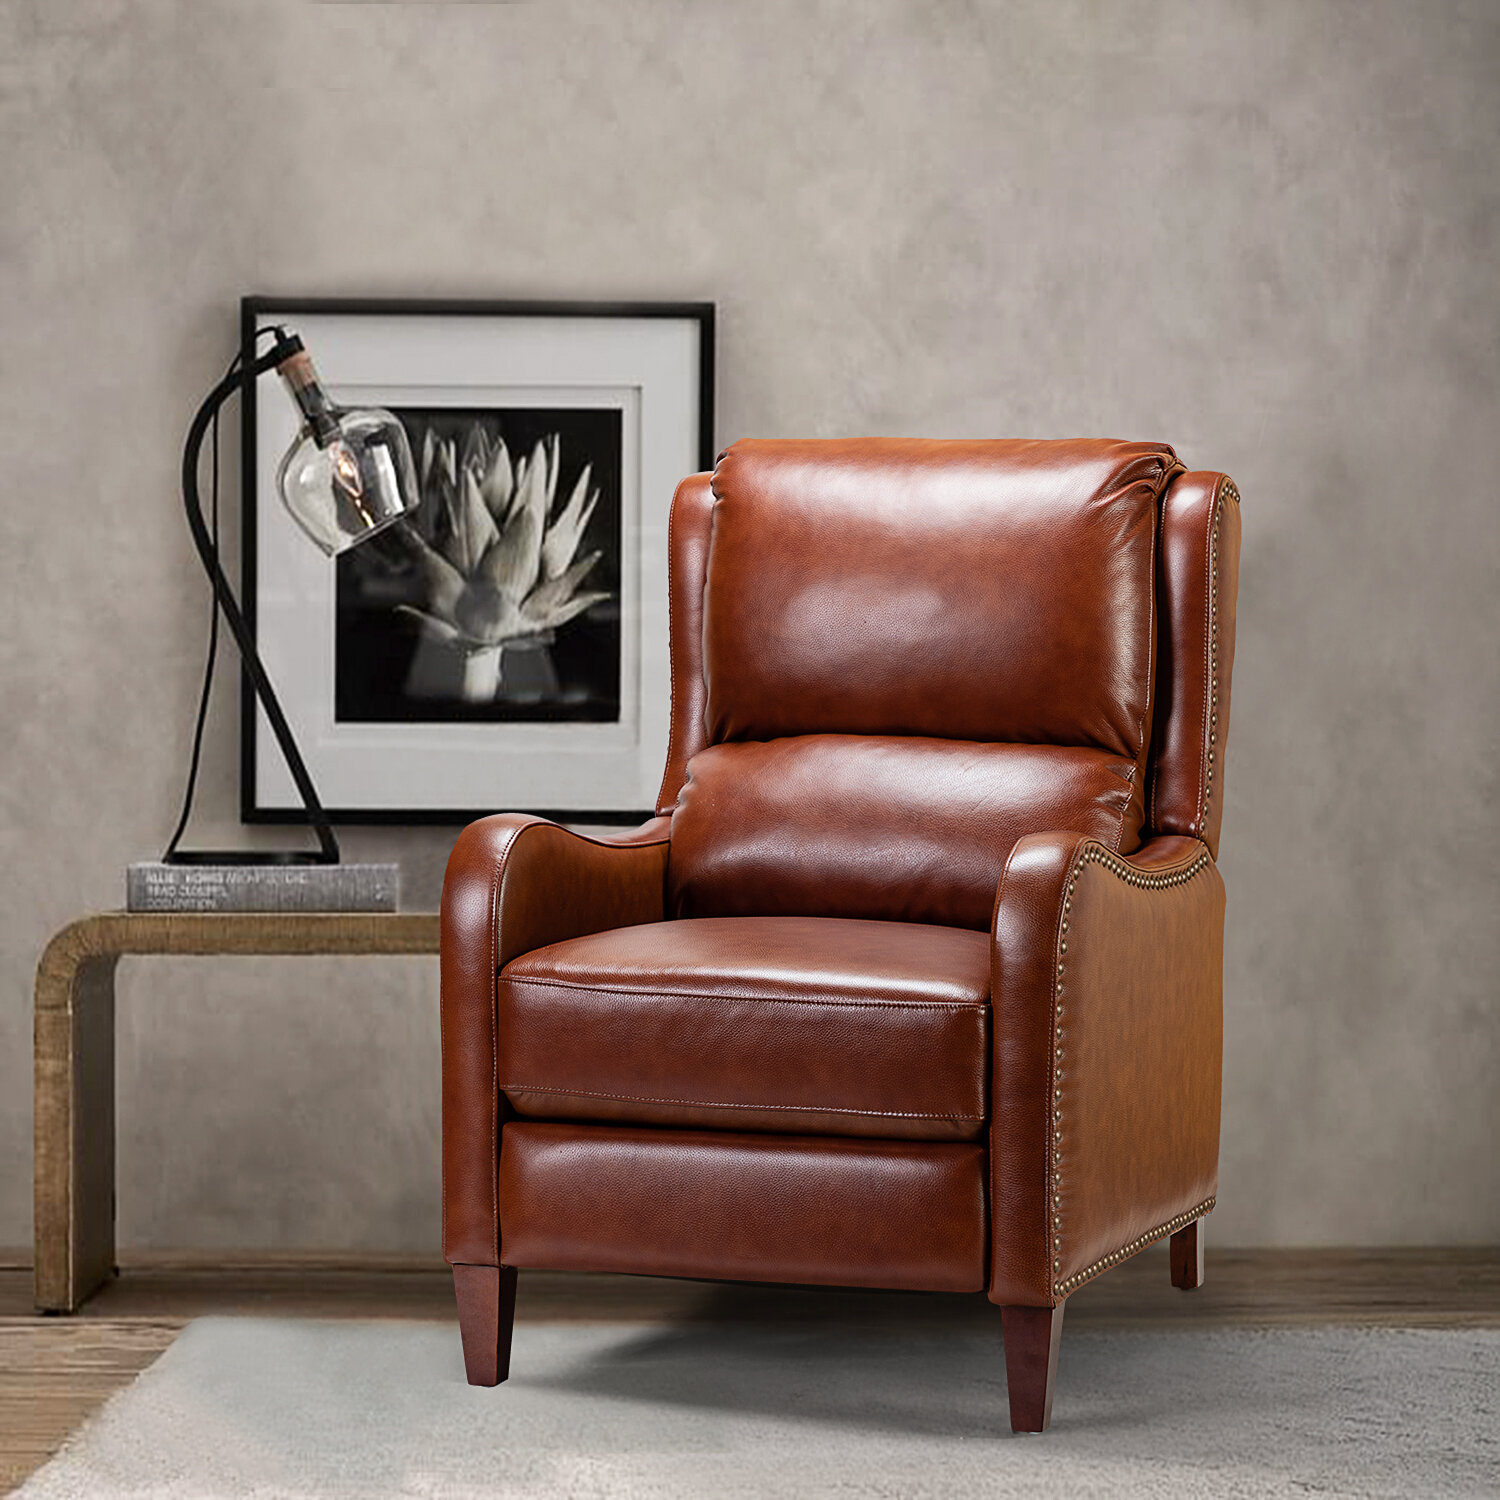 Stylish Leather Recliner Chair Manual Push-back Single Sofa Armchair Couch Seats 